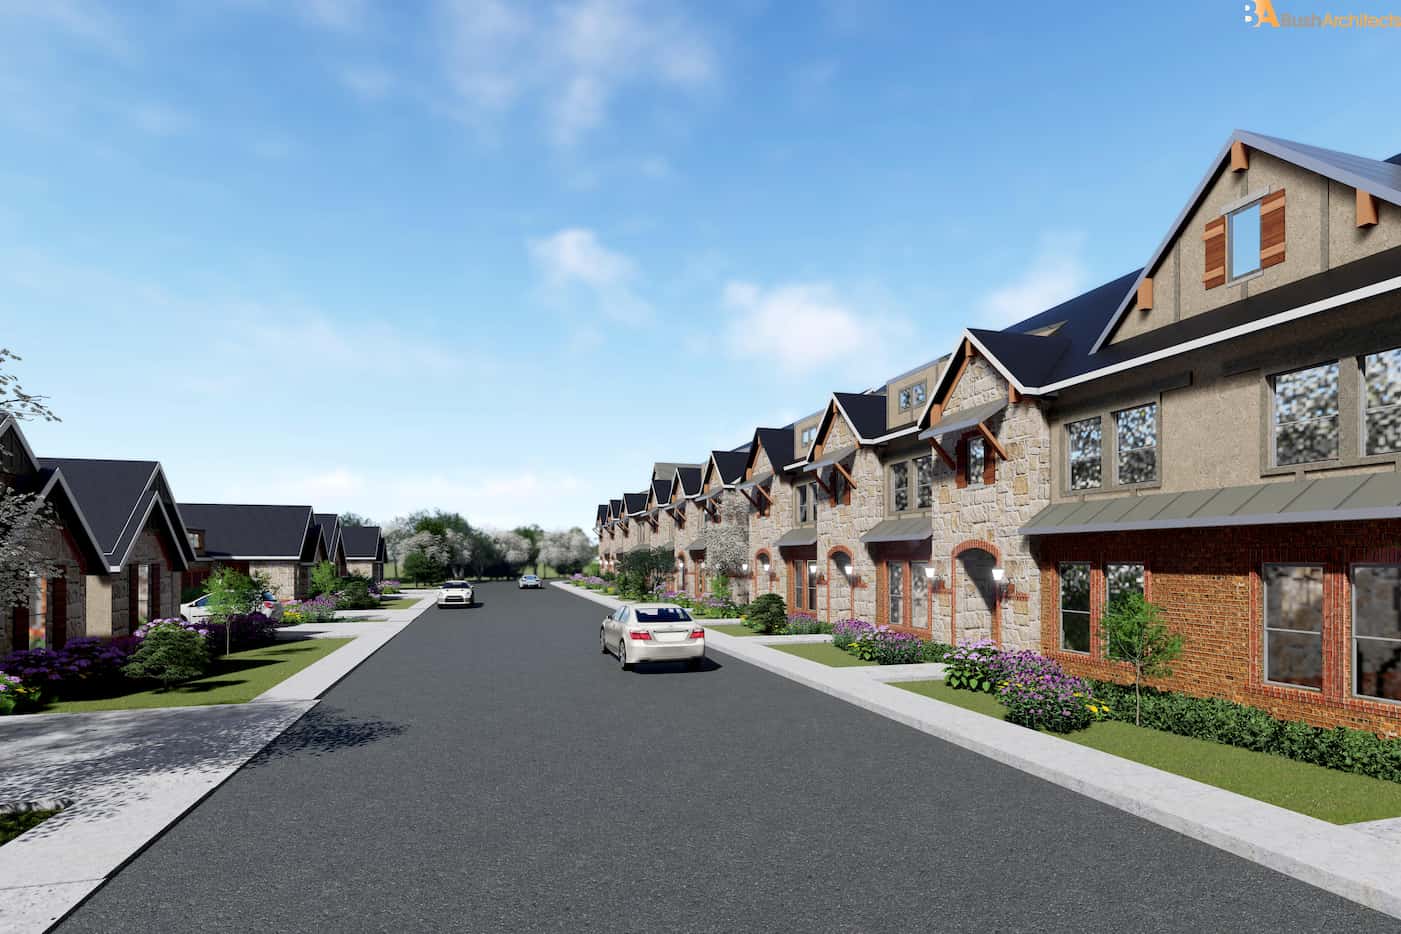 The planned Iron Horse Village will have more than 300 homes.